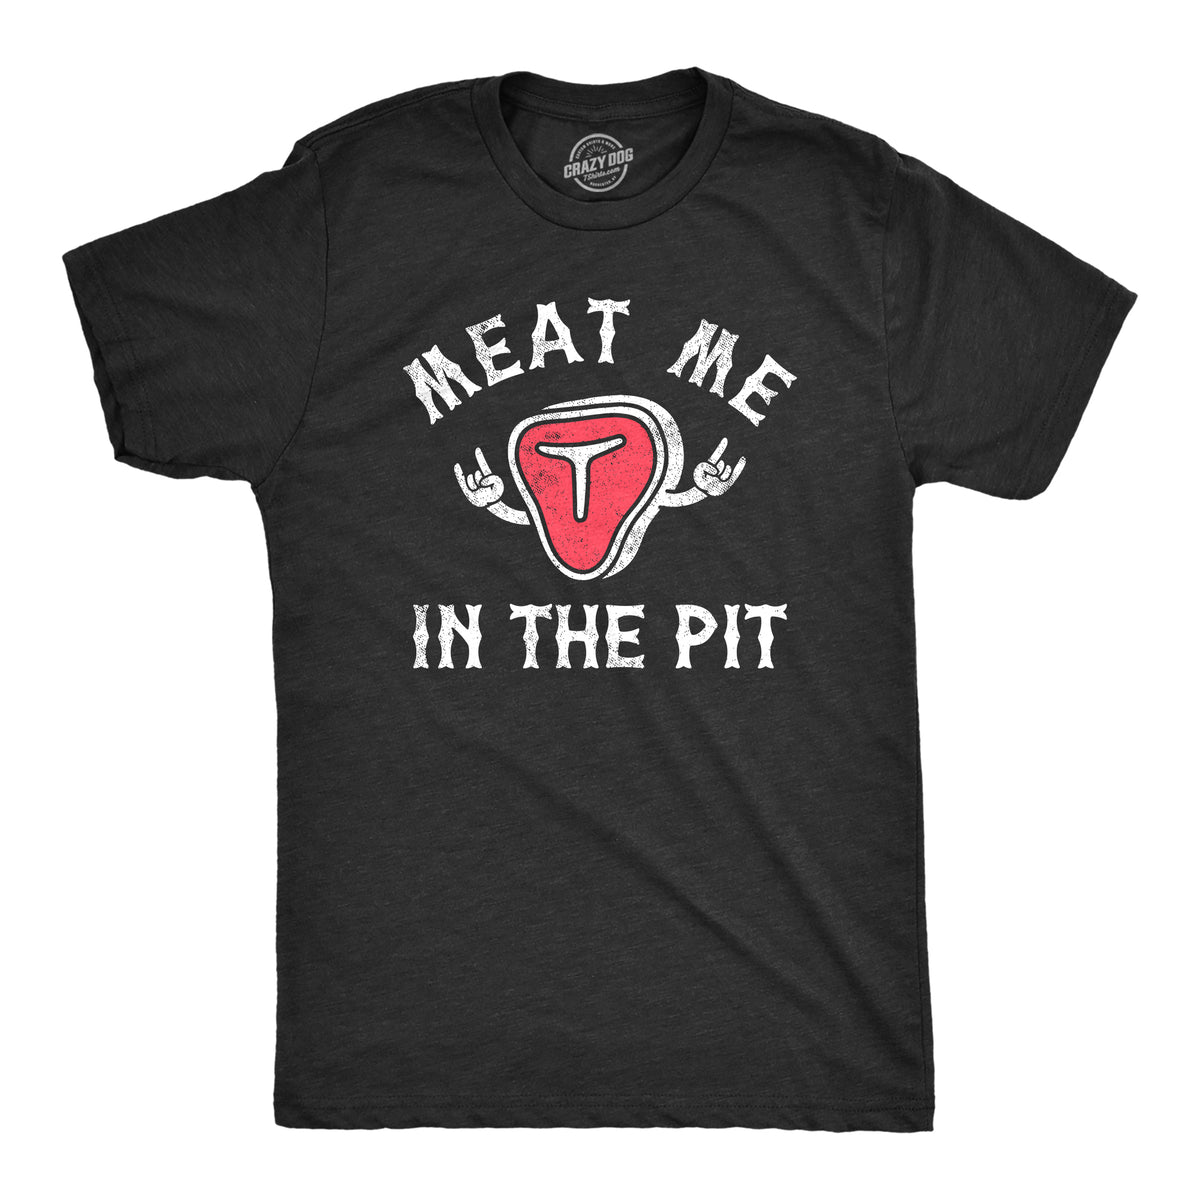 Funny Heather Black - MEAT Meat Me In The Pit Mens T Shirt Nerdy Food sarcastic Tee